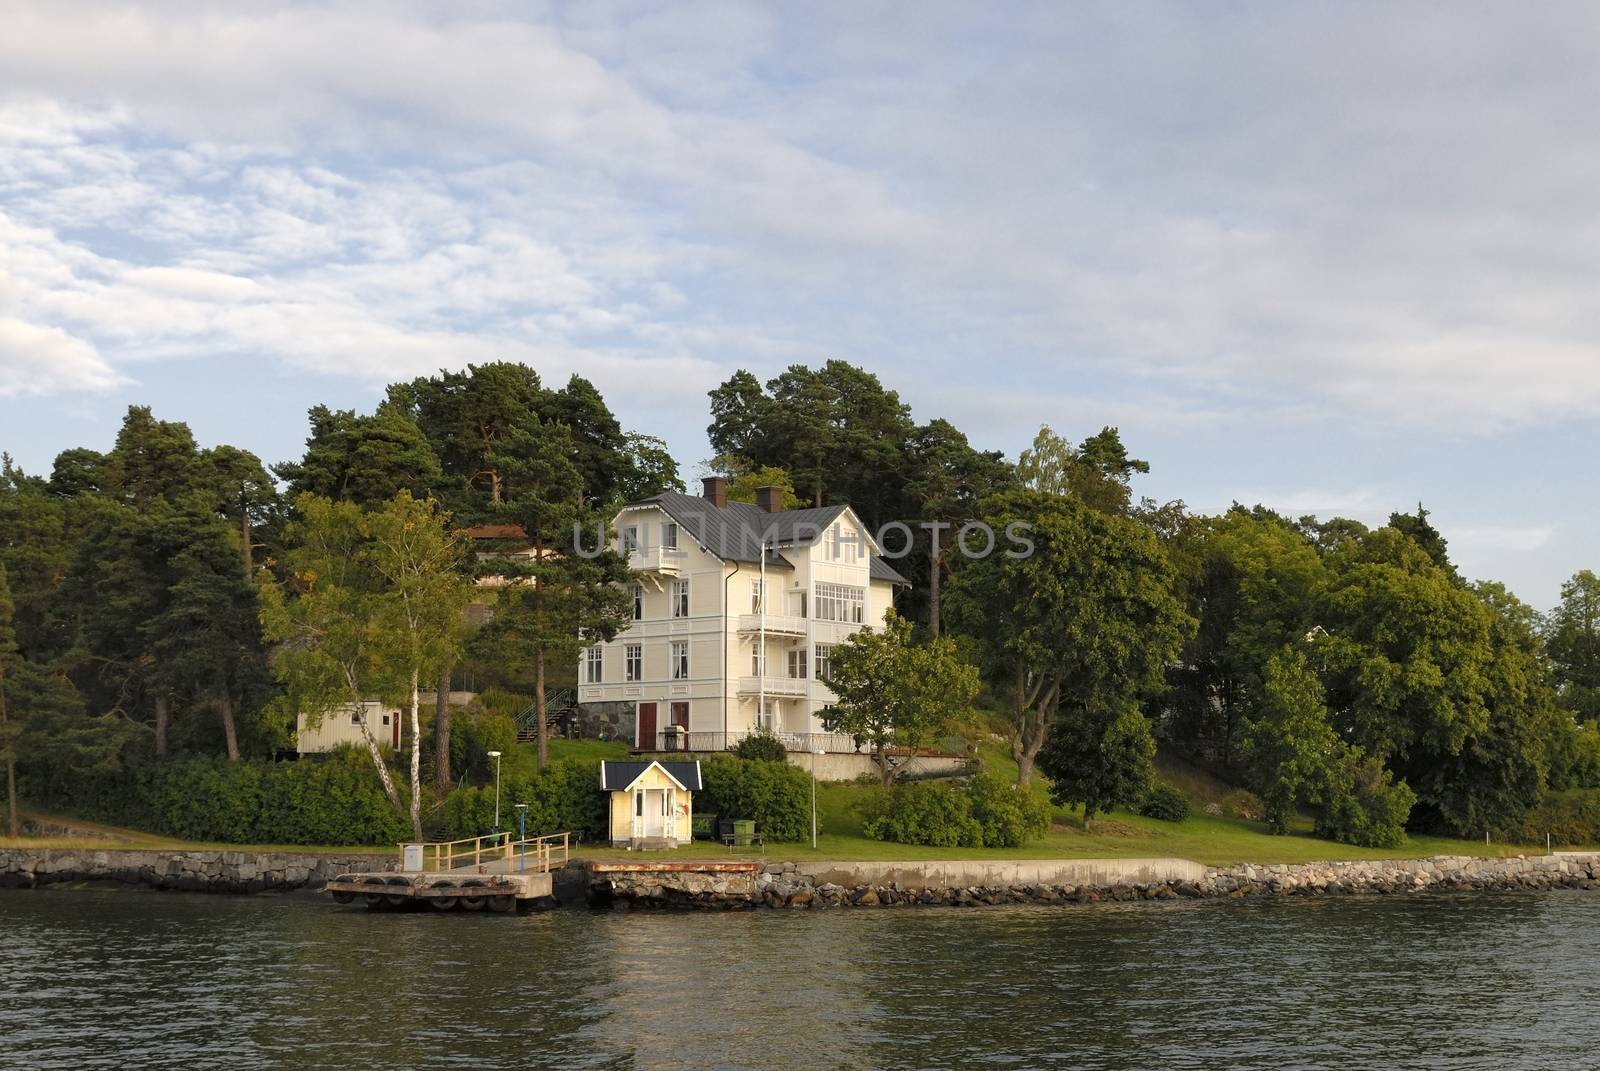 Idyllic houses by the baltic sea with jetties in a spring setting